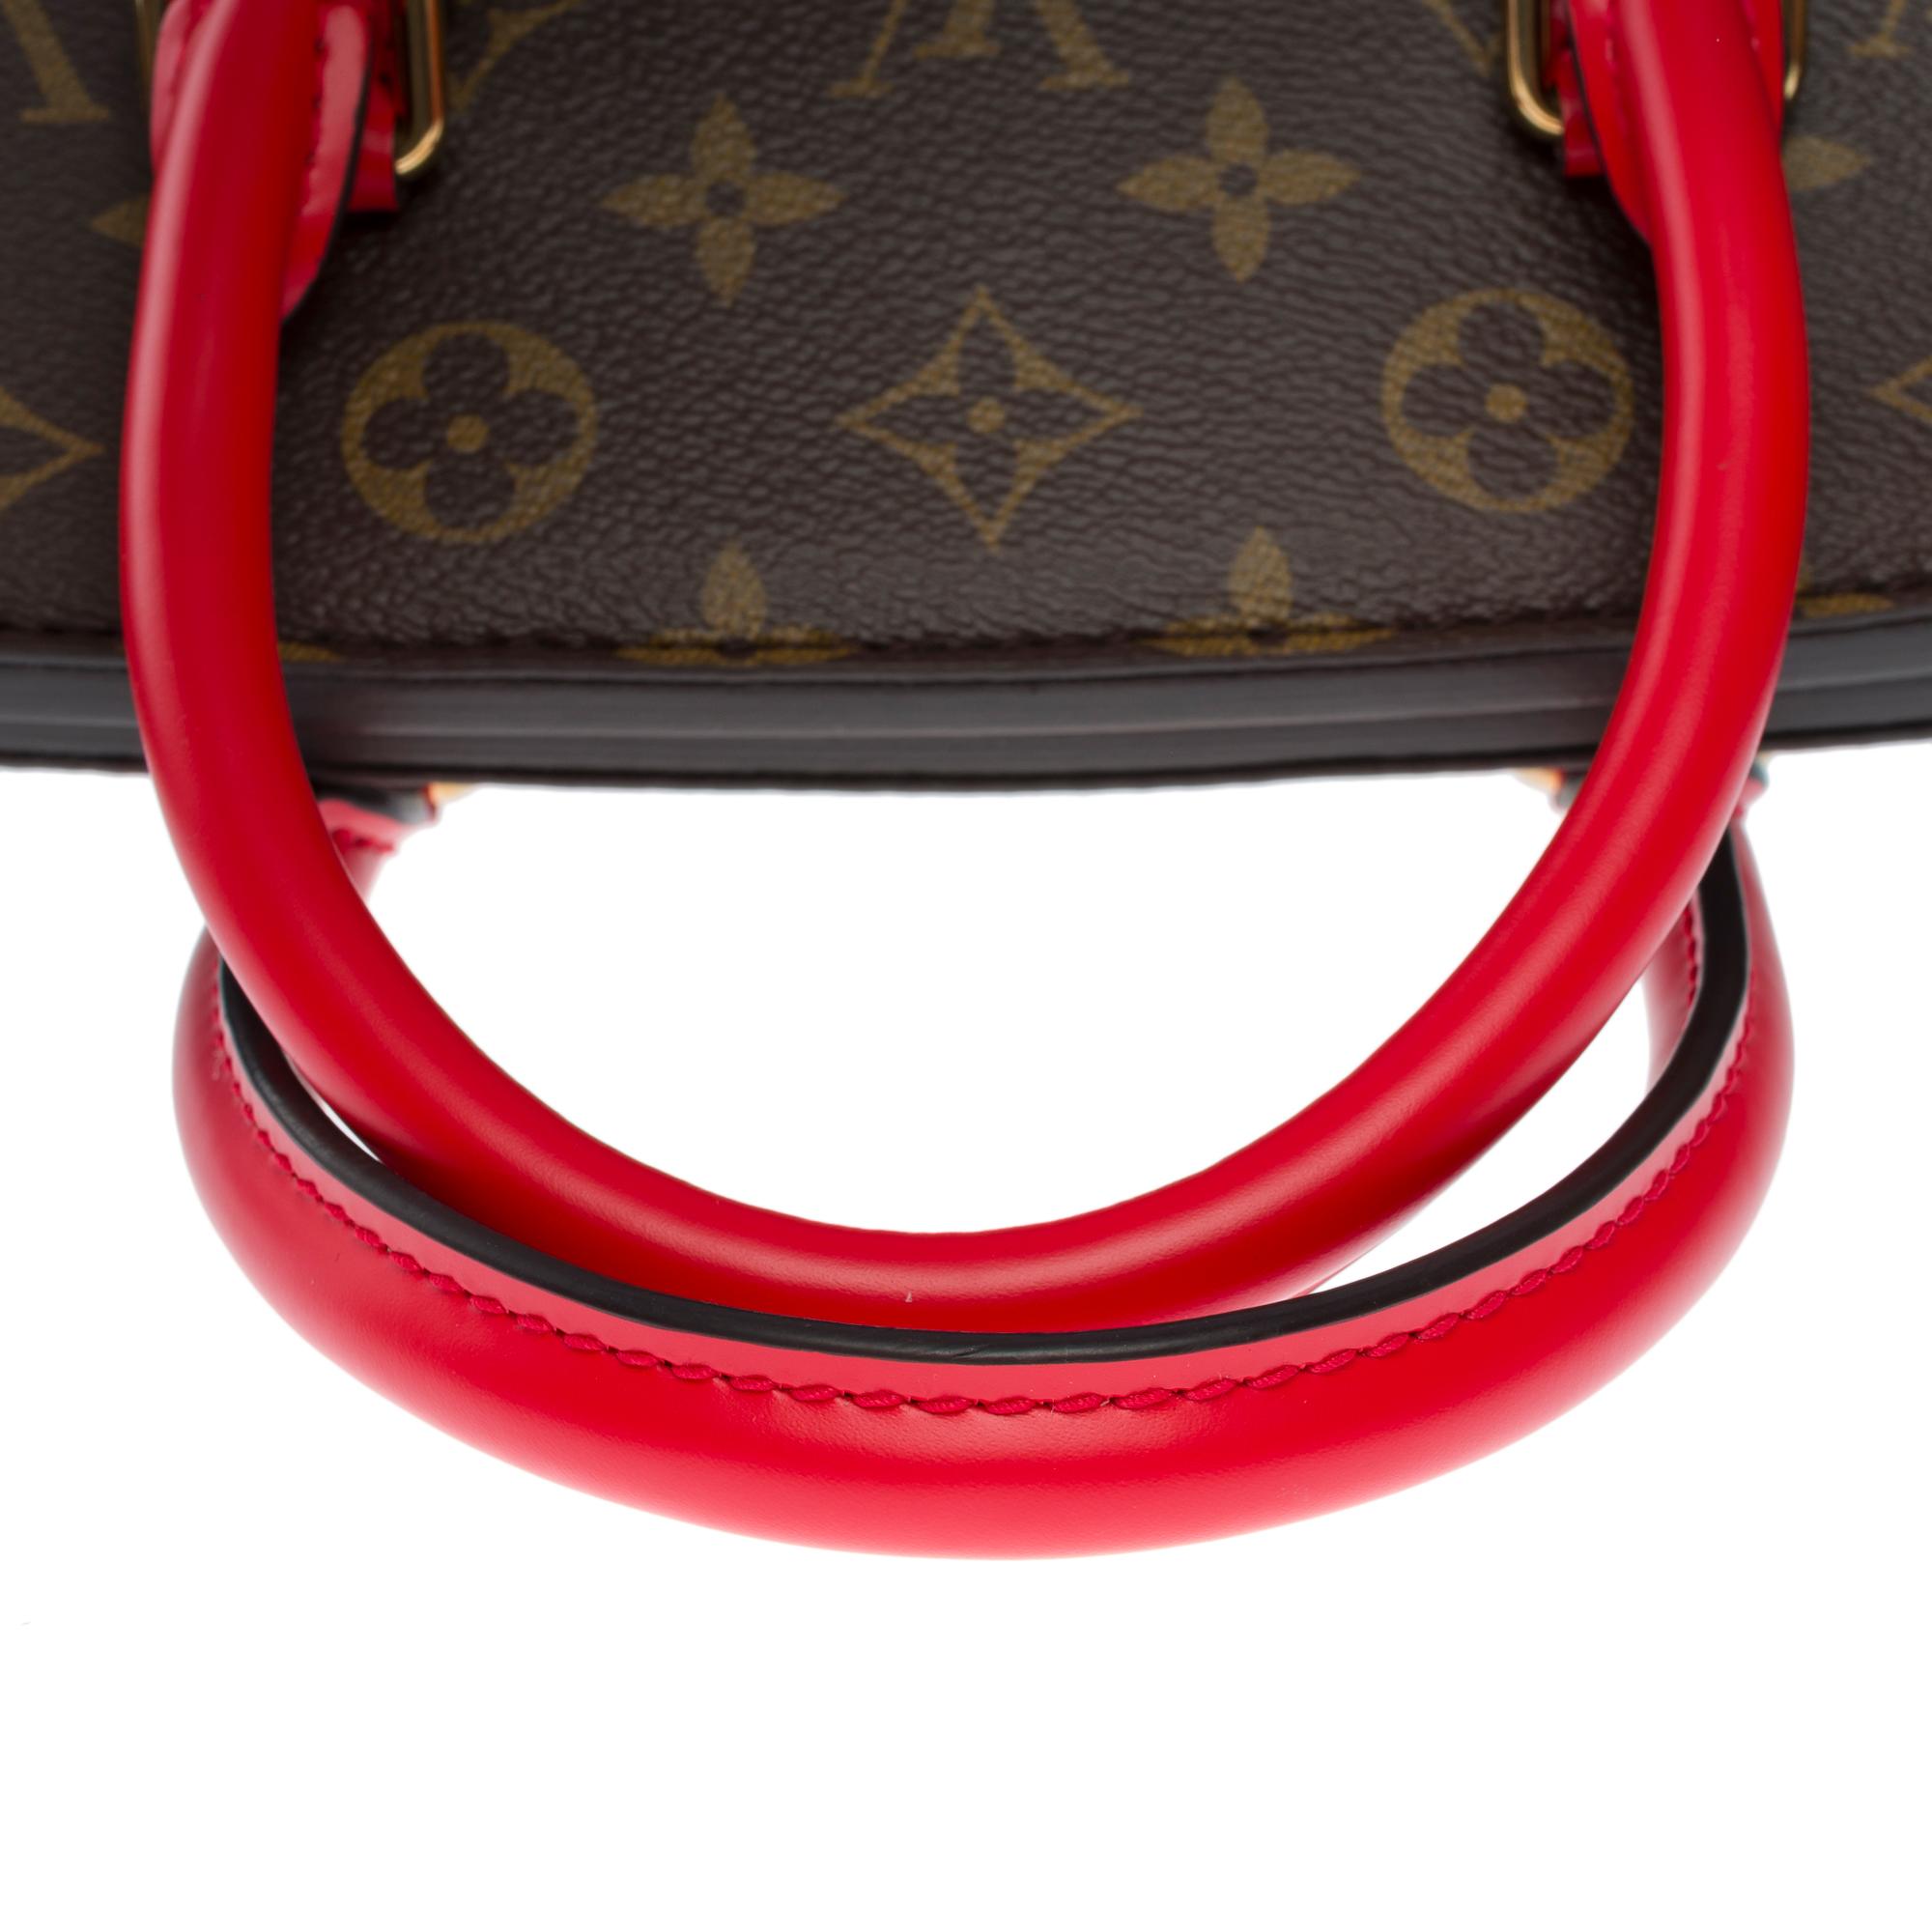 Sold Out Louis Vuitton Phenix handbag strap in brown canvas, GHW For Sale 5